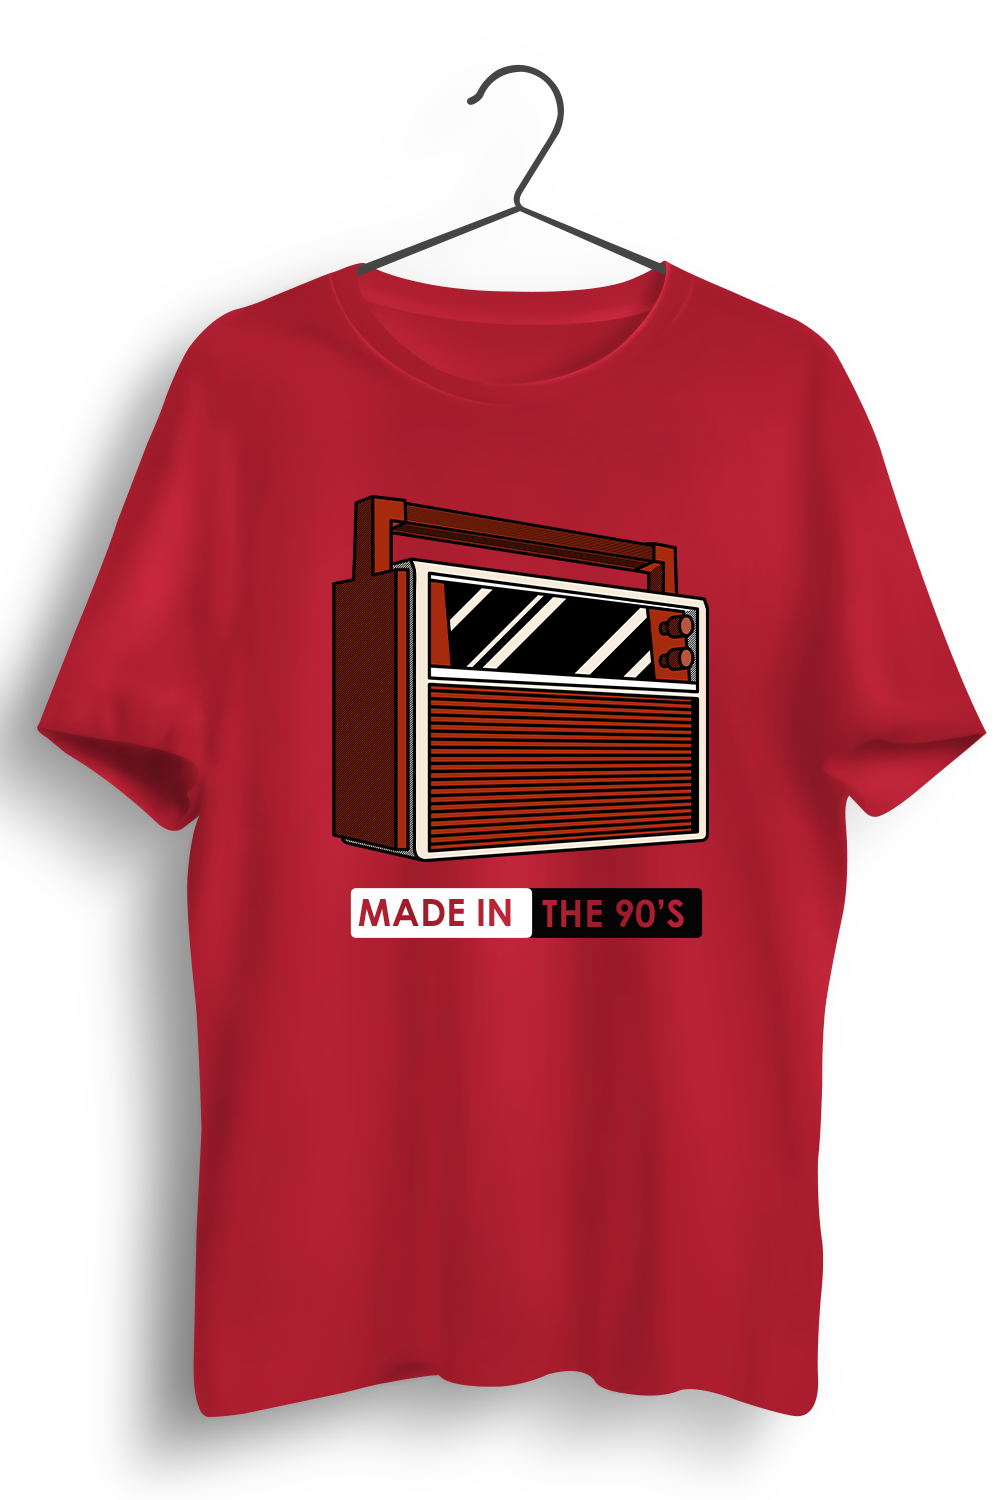 Made In The 90s Graphic Printed Red Tshirt